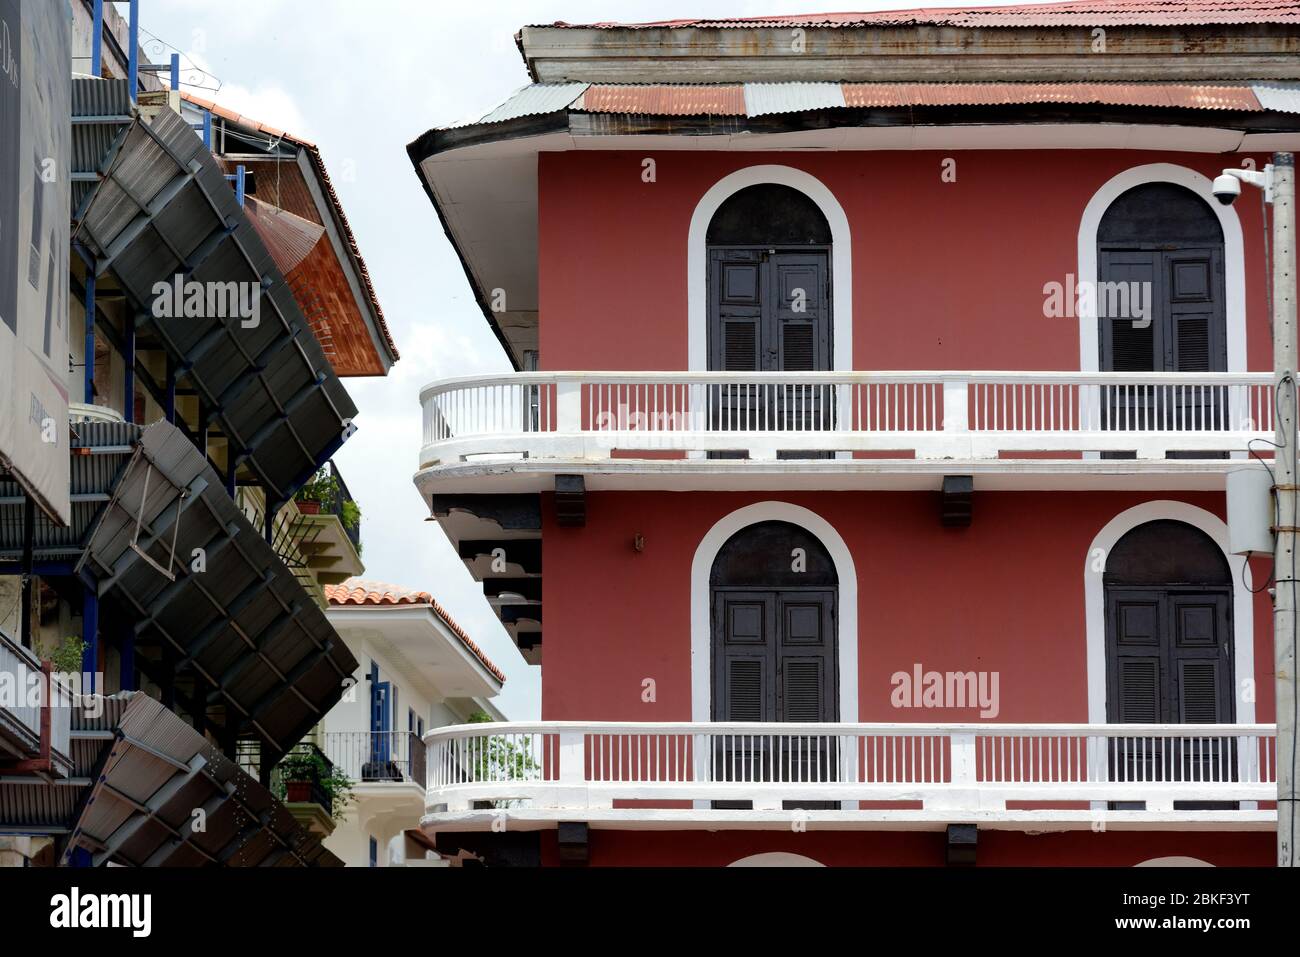 Construction and restoration of Spanish colonial architecture buildings in the old town of Casco Viejo, Panama City, Panama Stock Photo